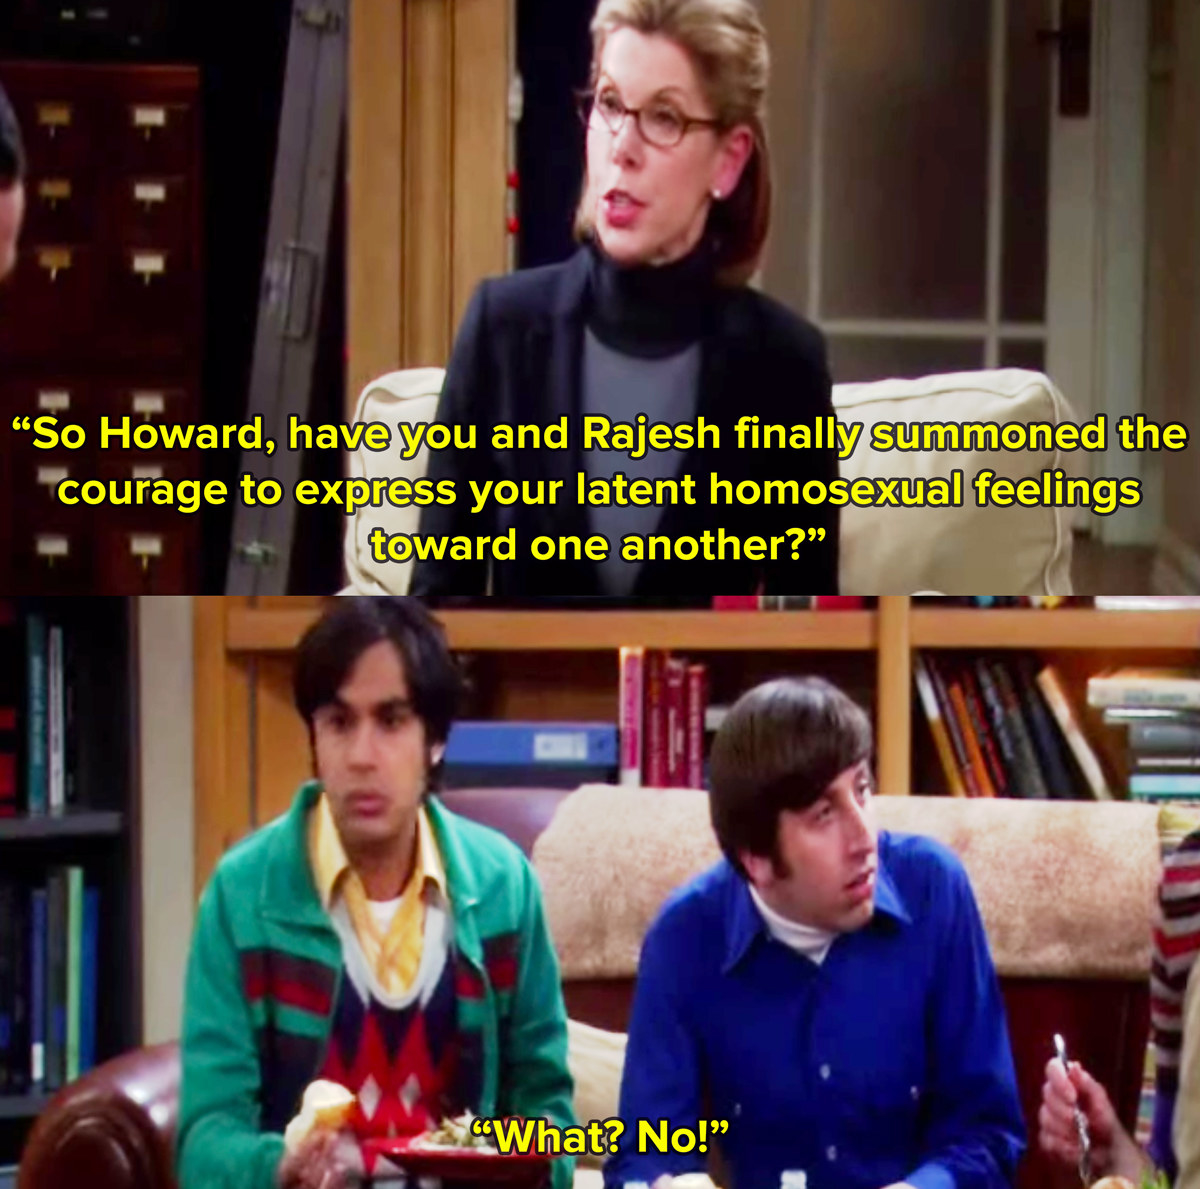 Sheldon&#x27;s mum from The Big Bang Theory played by Christine Baranski sits on a couch and asks Howard and Rajesh if they have summoned the courage to express their latent gay feelings for each other, to which they both reply what, no